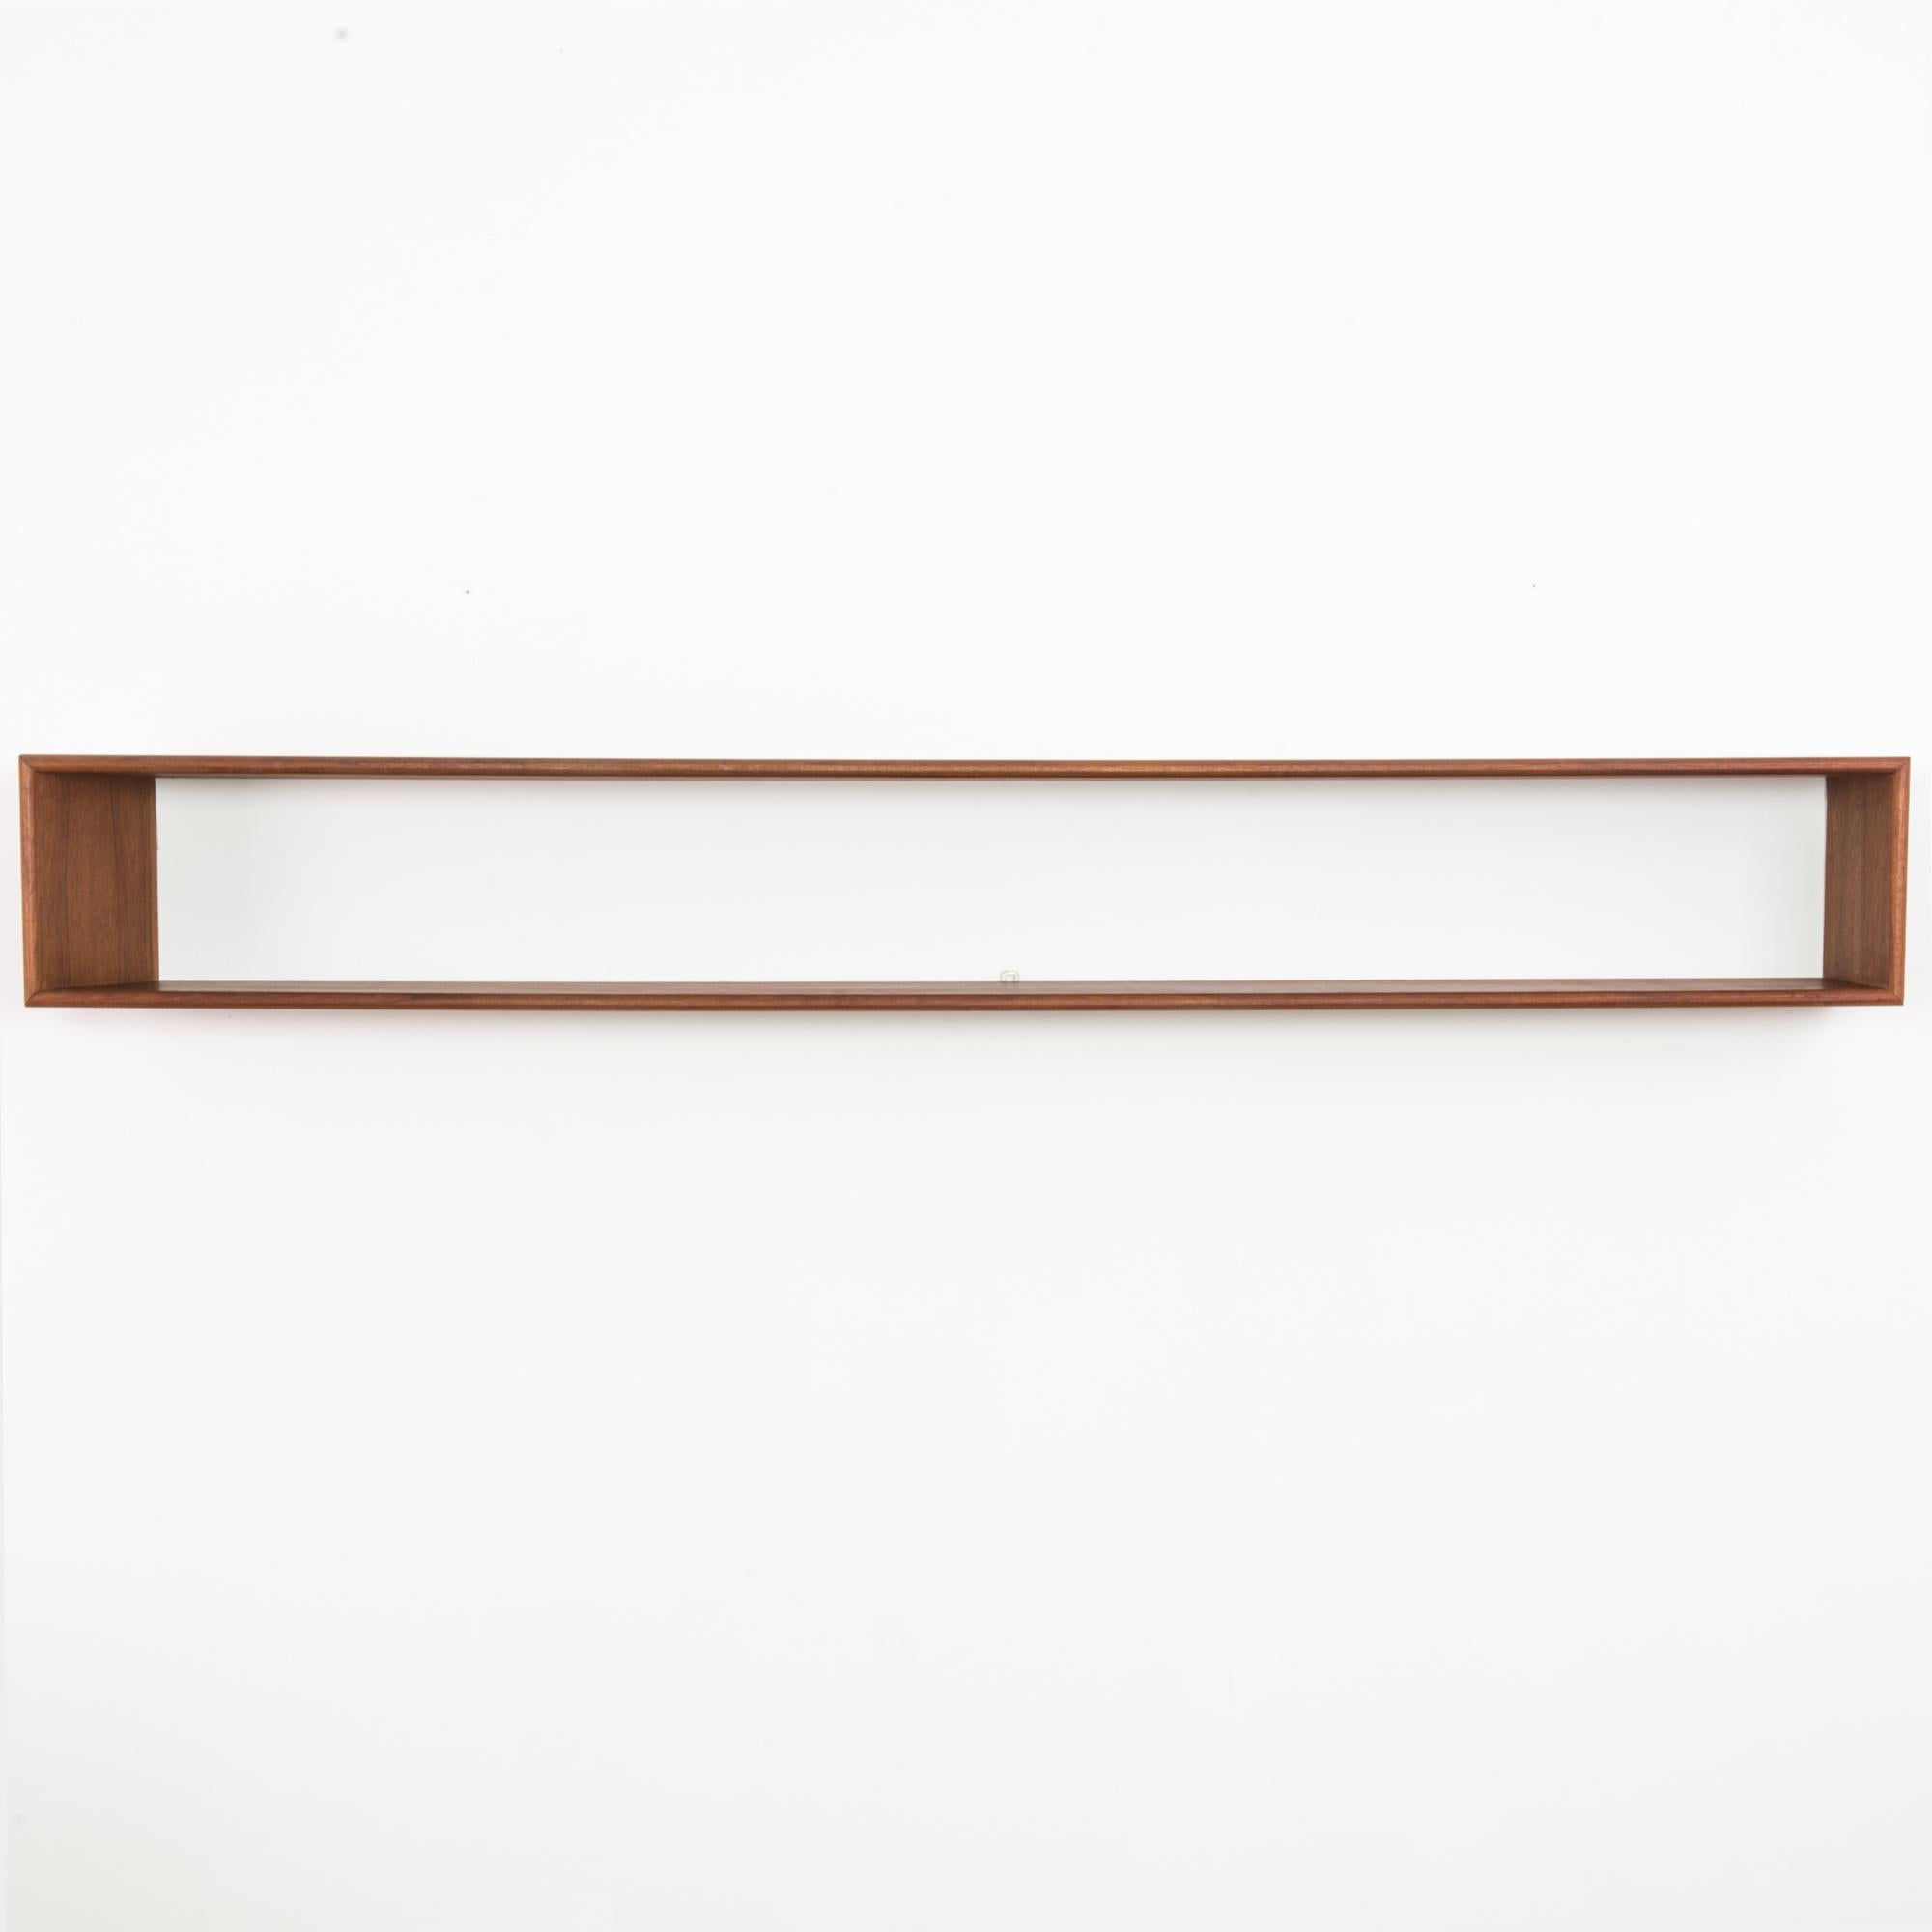 This wooden wall shelf was made in Denmark, circa 1960. With its simple, rectangular silhouette and smooth, polished wood, it offers the warmth and functionality of Danish modern design.